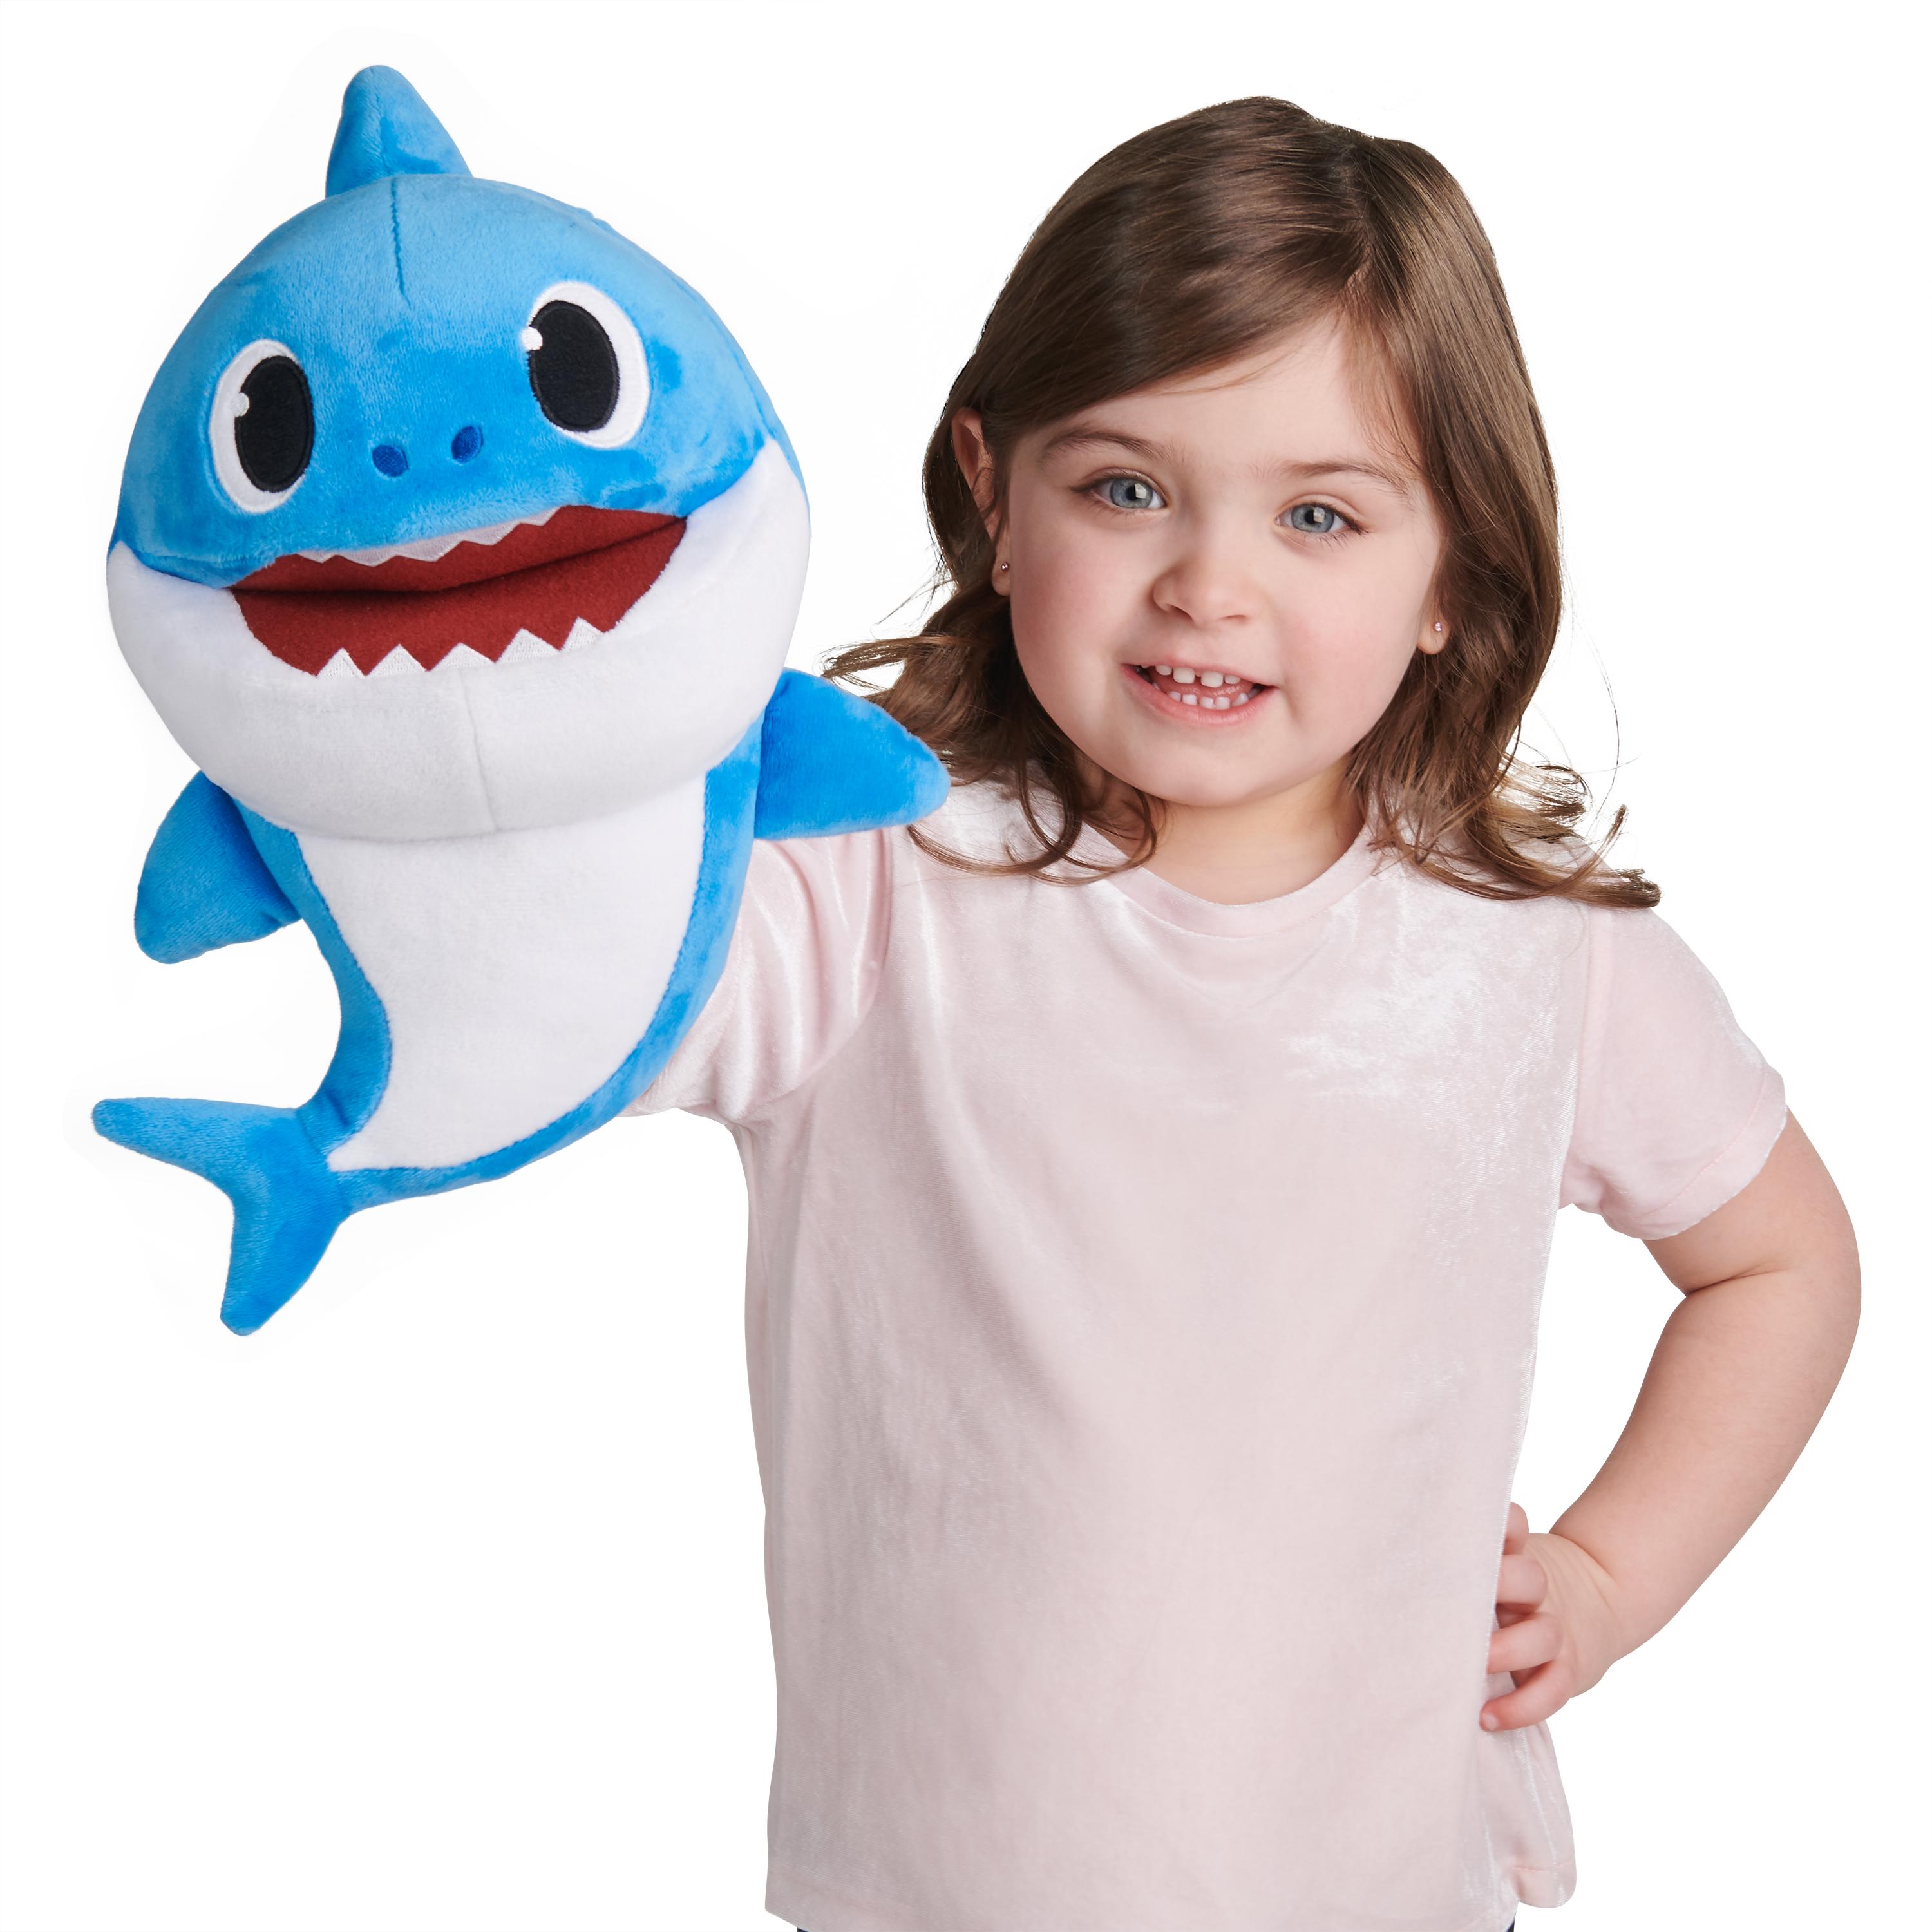 Pinkfong Baby Shark OfficialSong Puppet with Tempo Control - Daddy Shark - Interactive Preschool Plush Toy - By WowWee - image 5 of 8